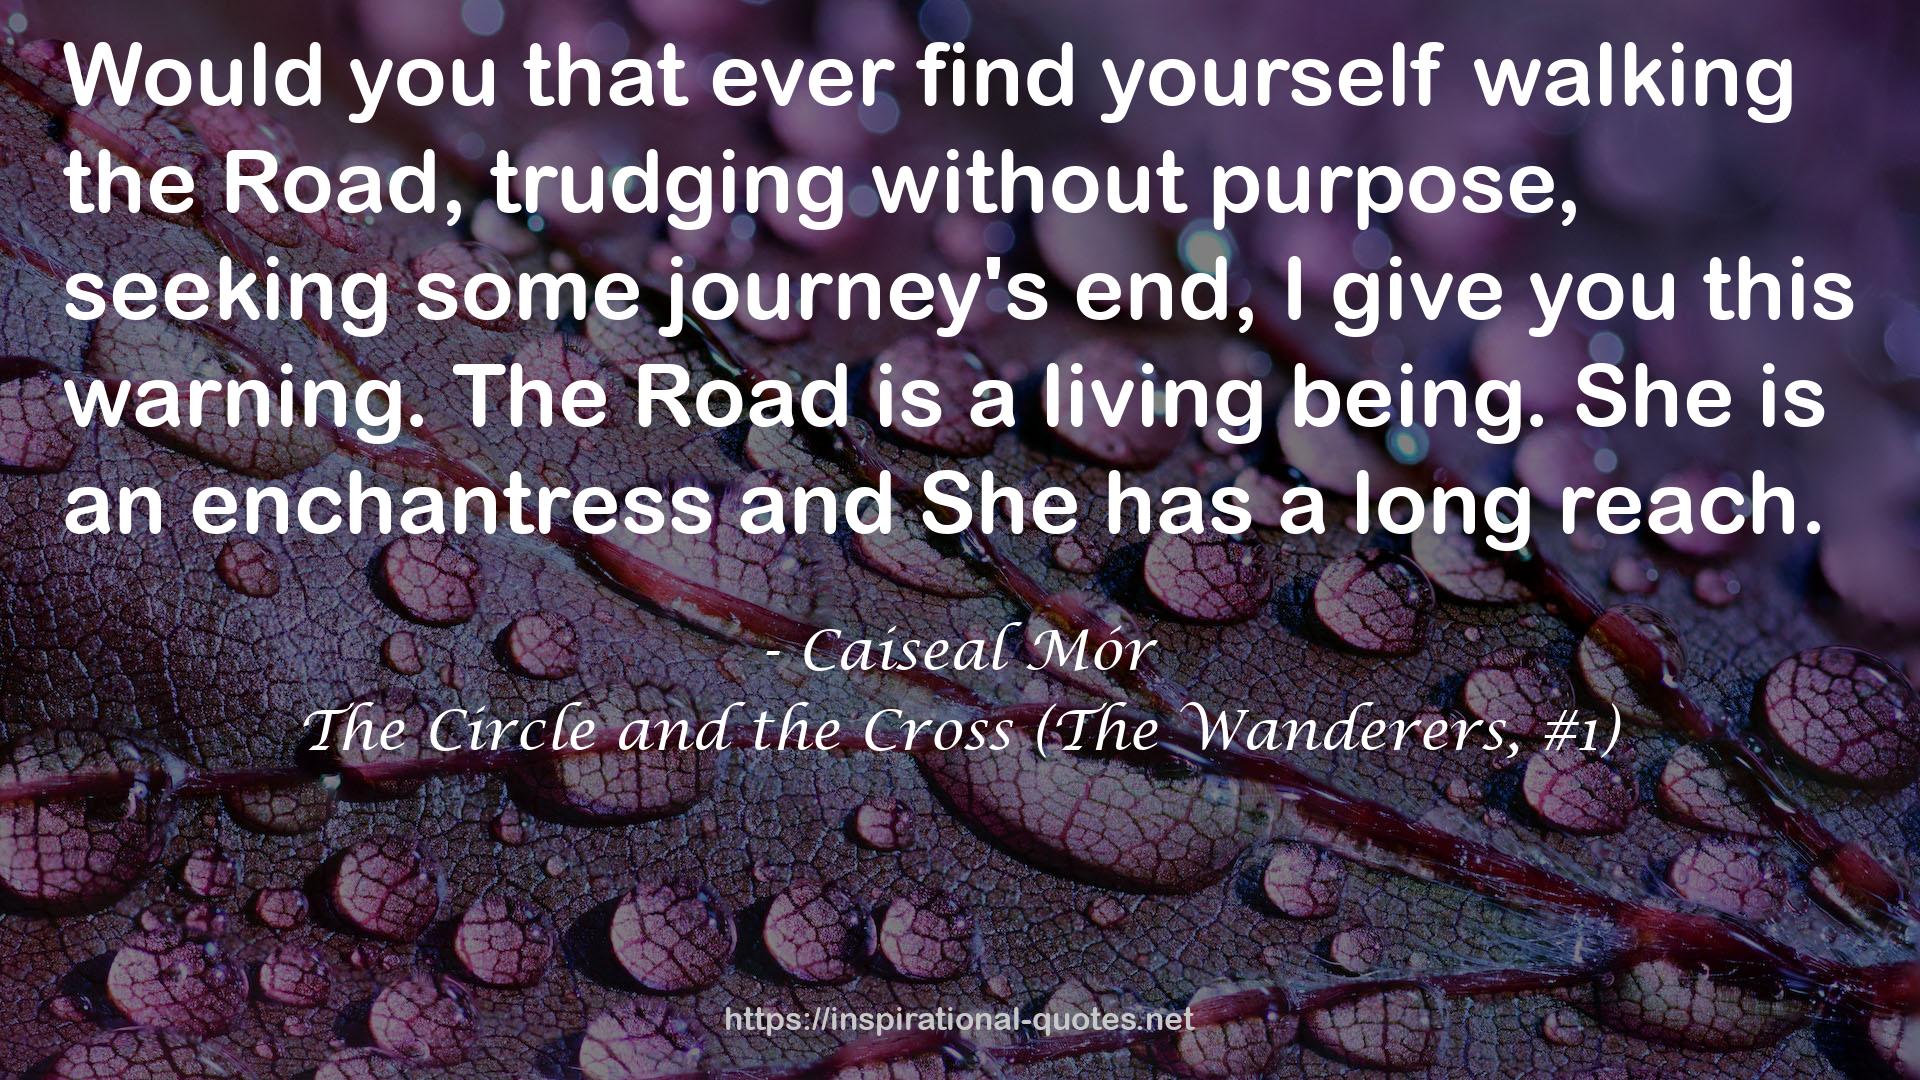 The Circle and the Cross (The Wanderers, #1) QUOTES